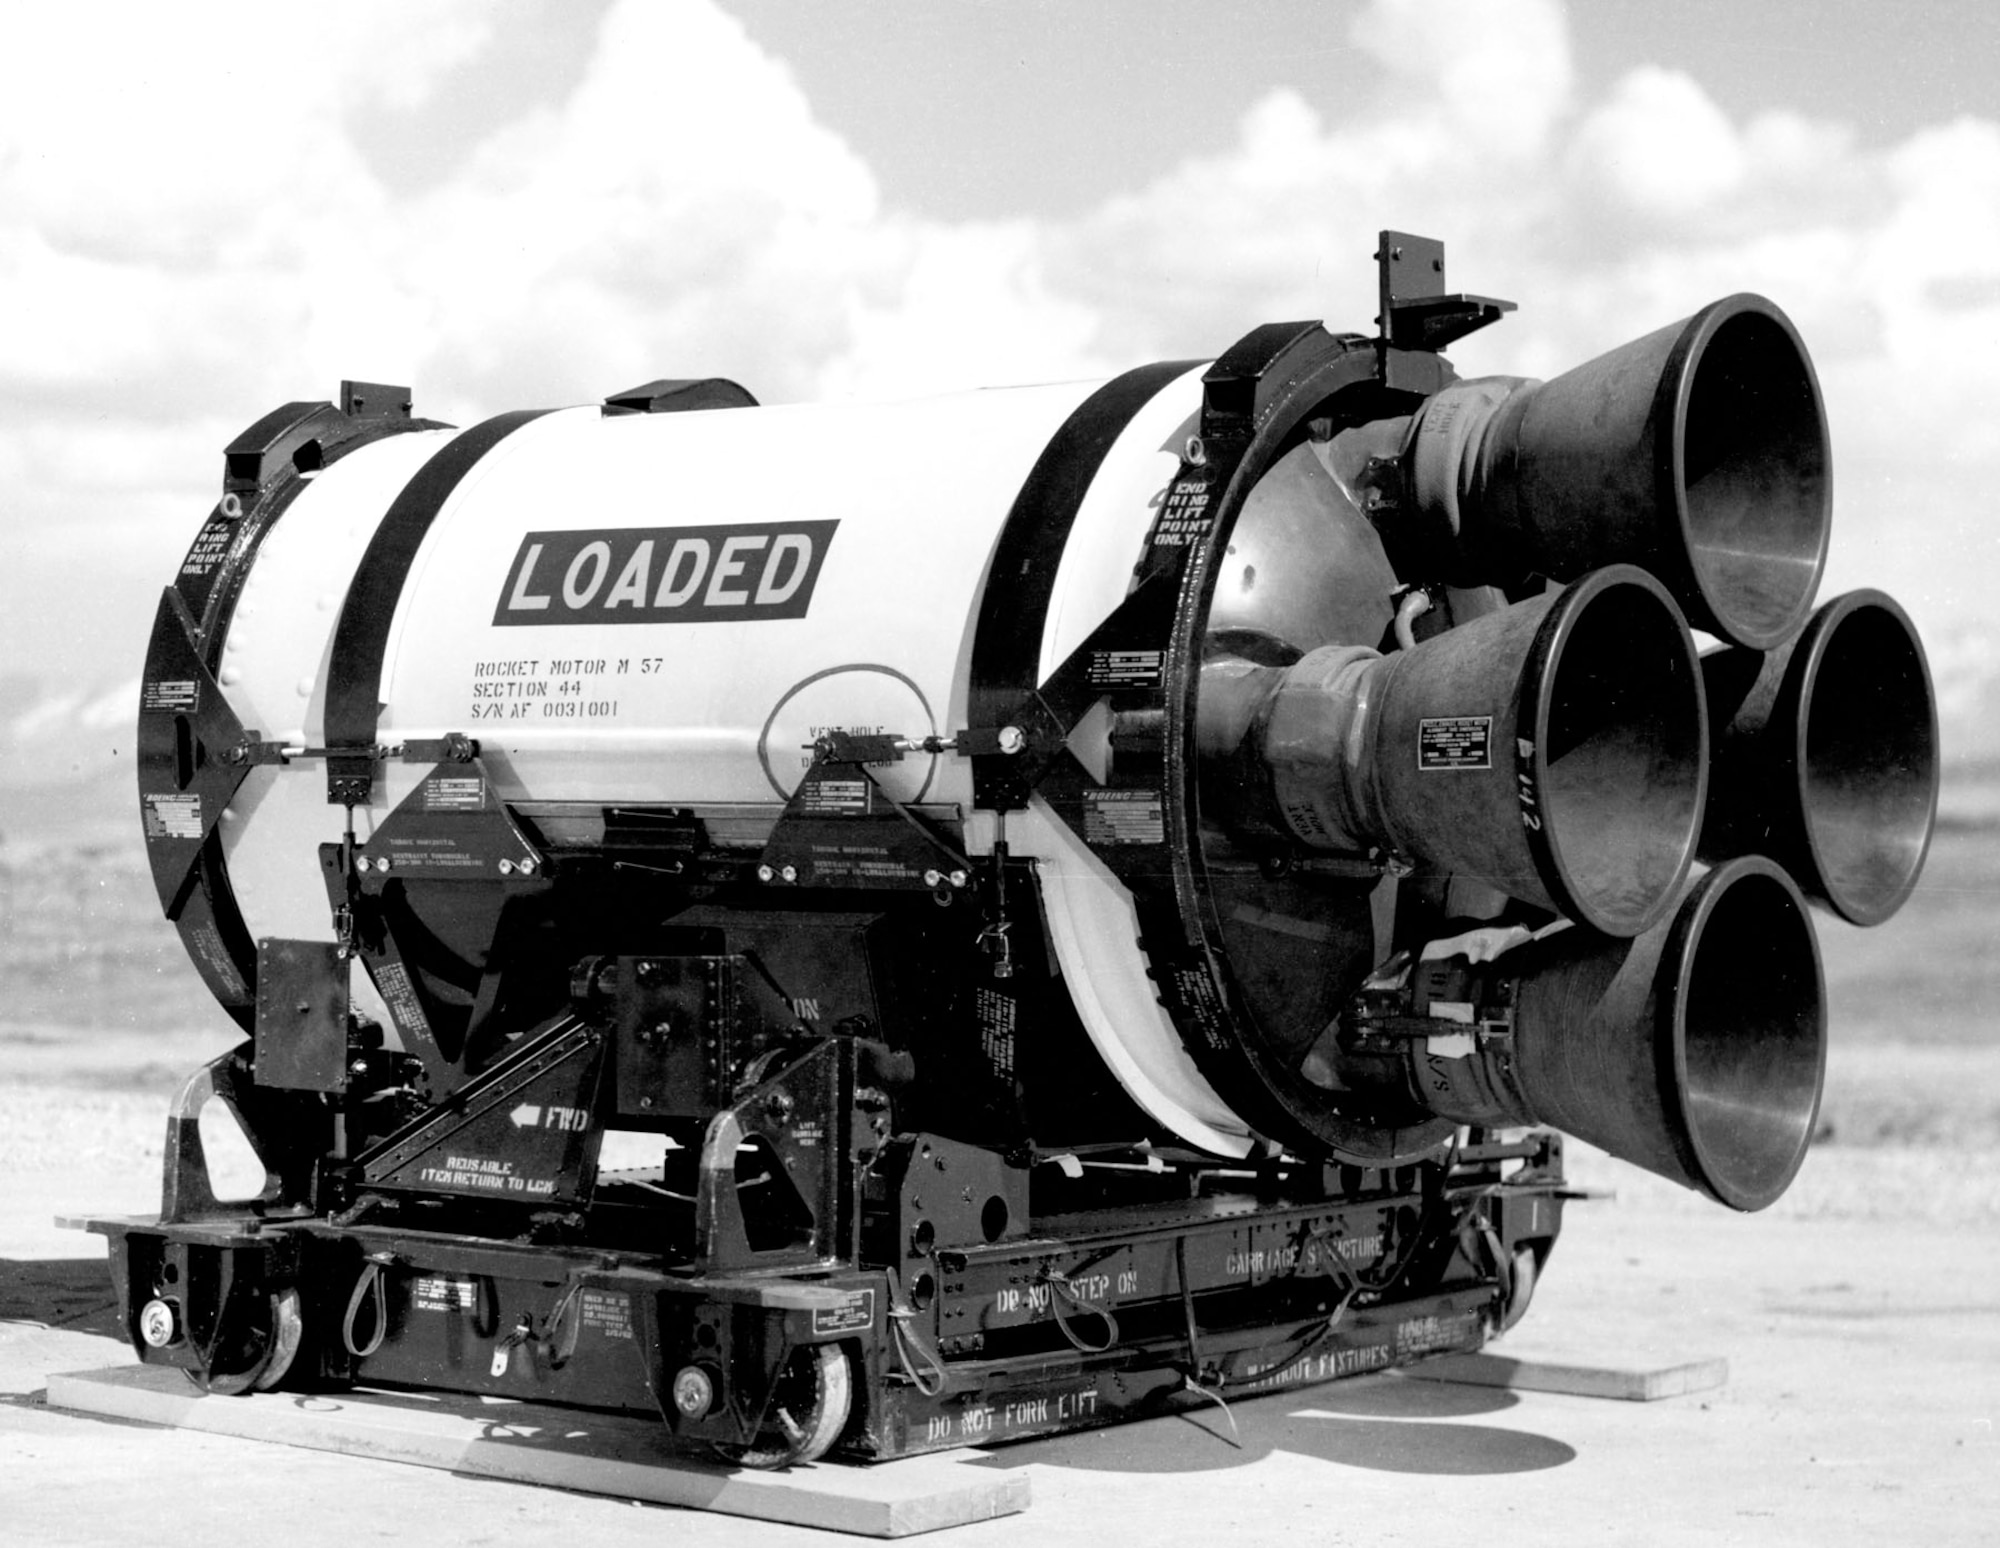 Each solid rocket stage featured four steerable rocket nozzles. This third-stage motor was made by the Hercules Powder Co. (U.S. Air Force photo)